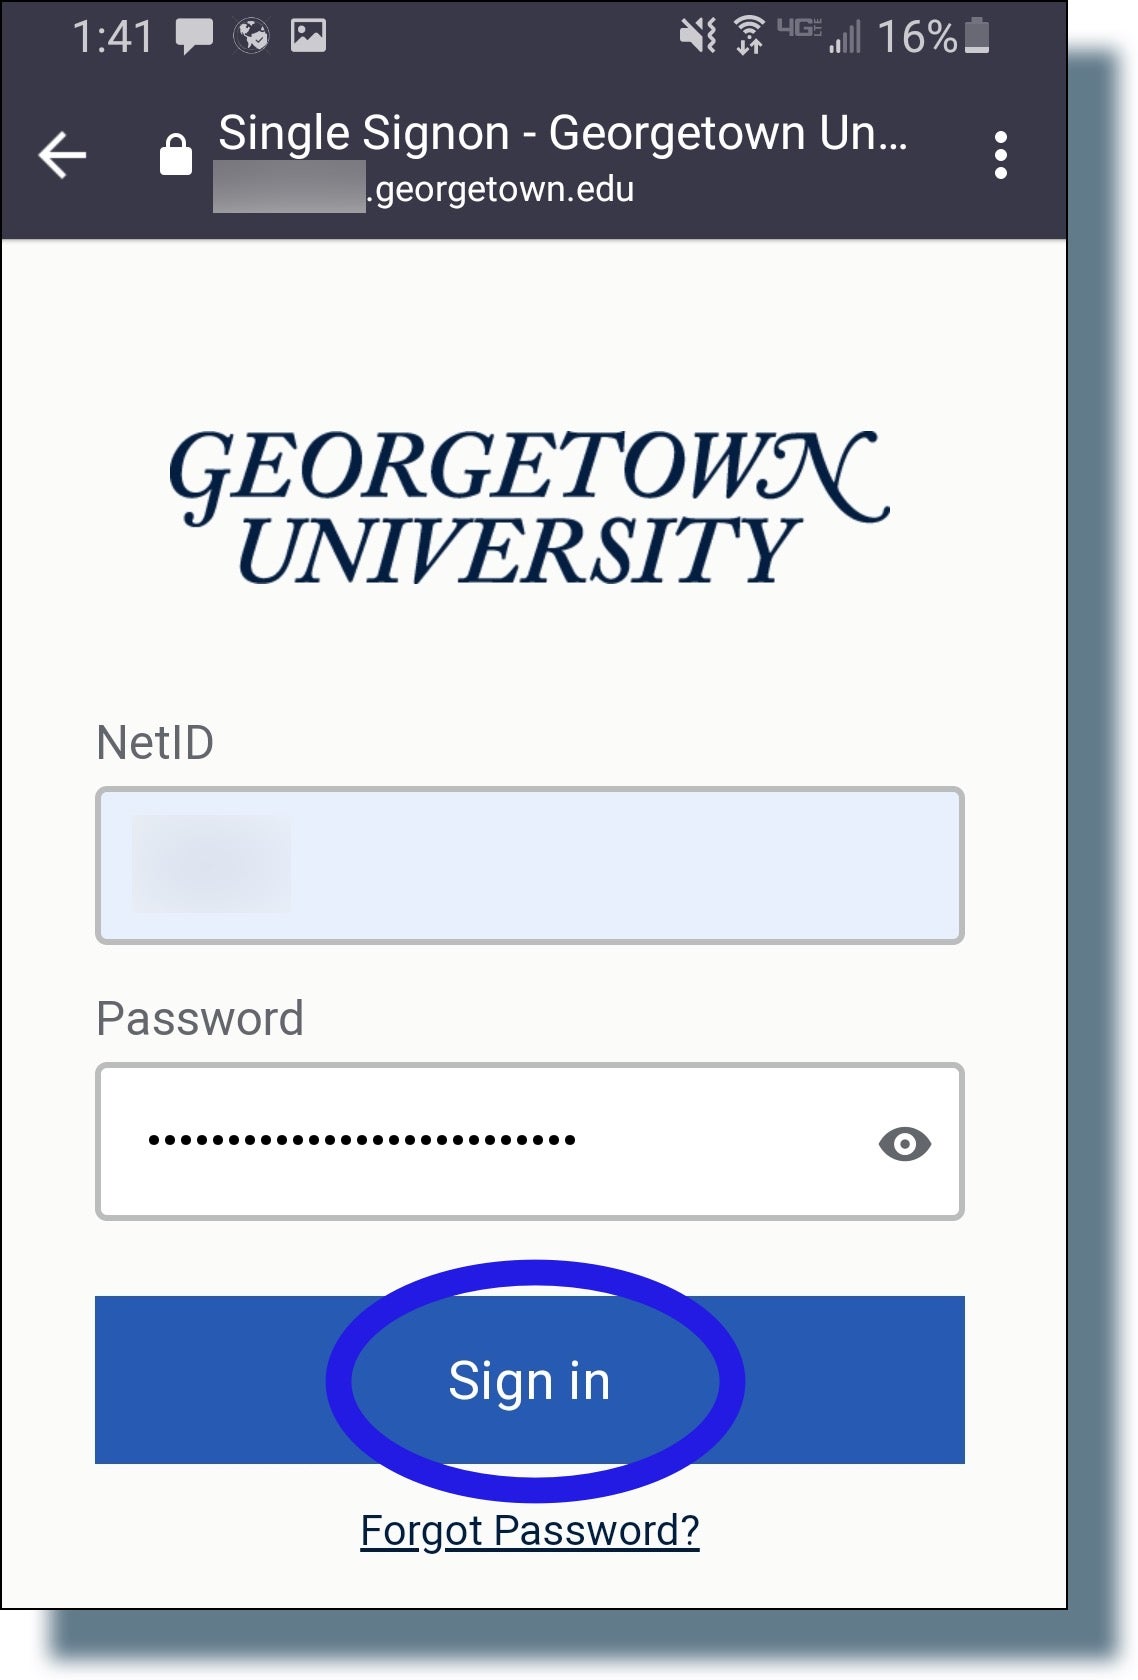 Entering your NetID and password at GU login prompt.